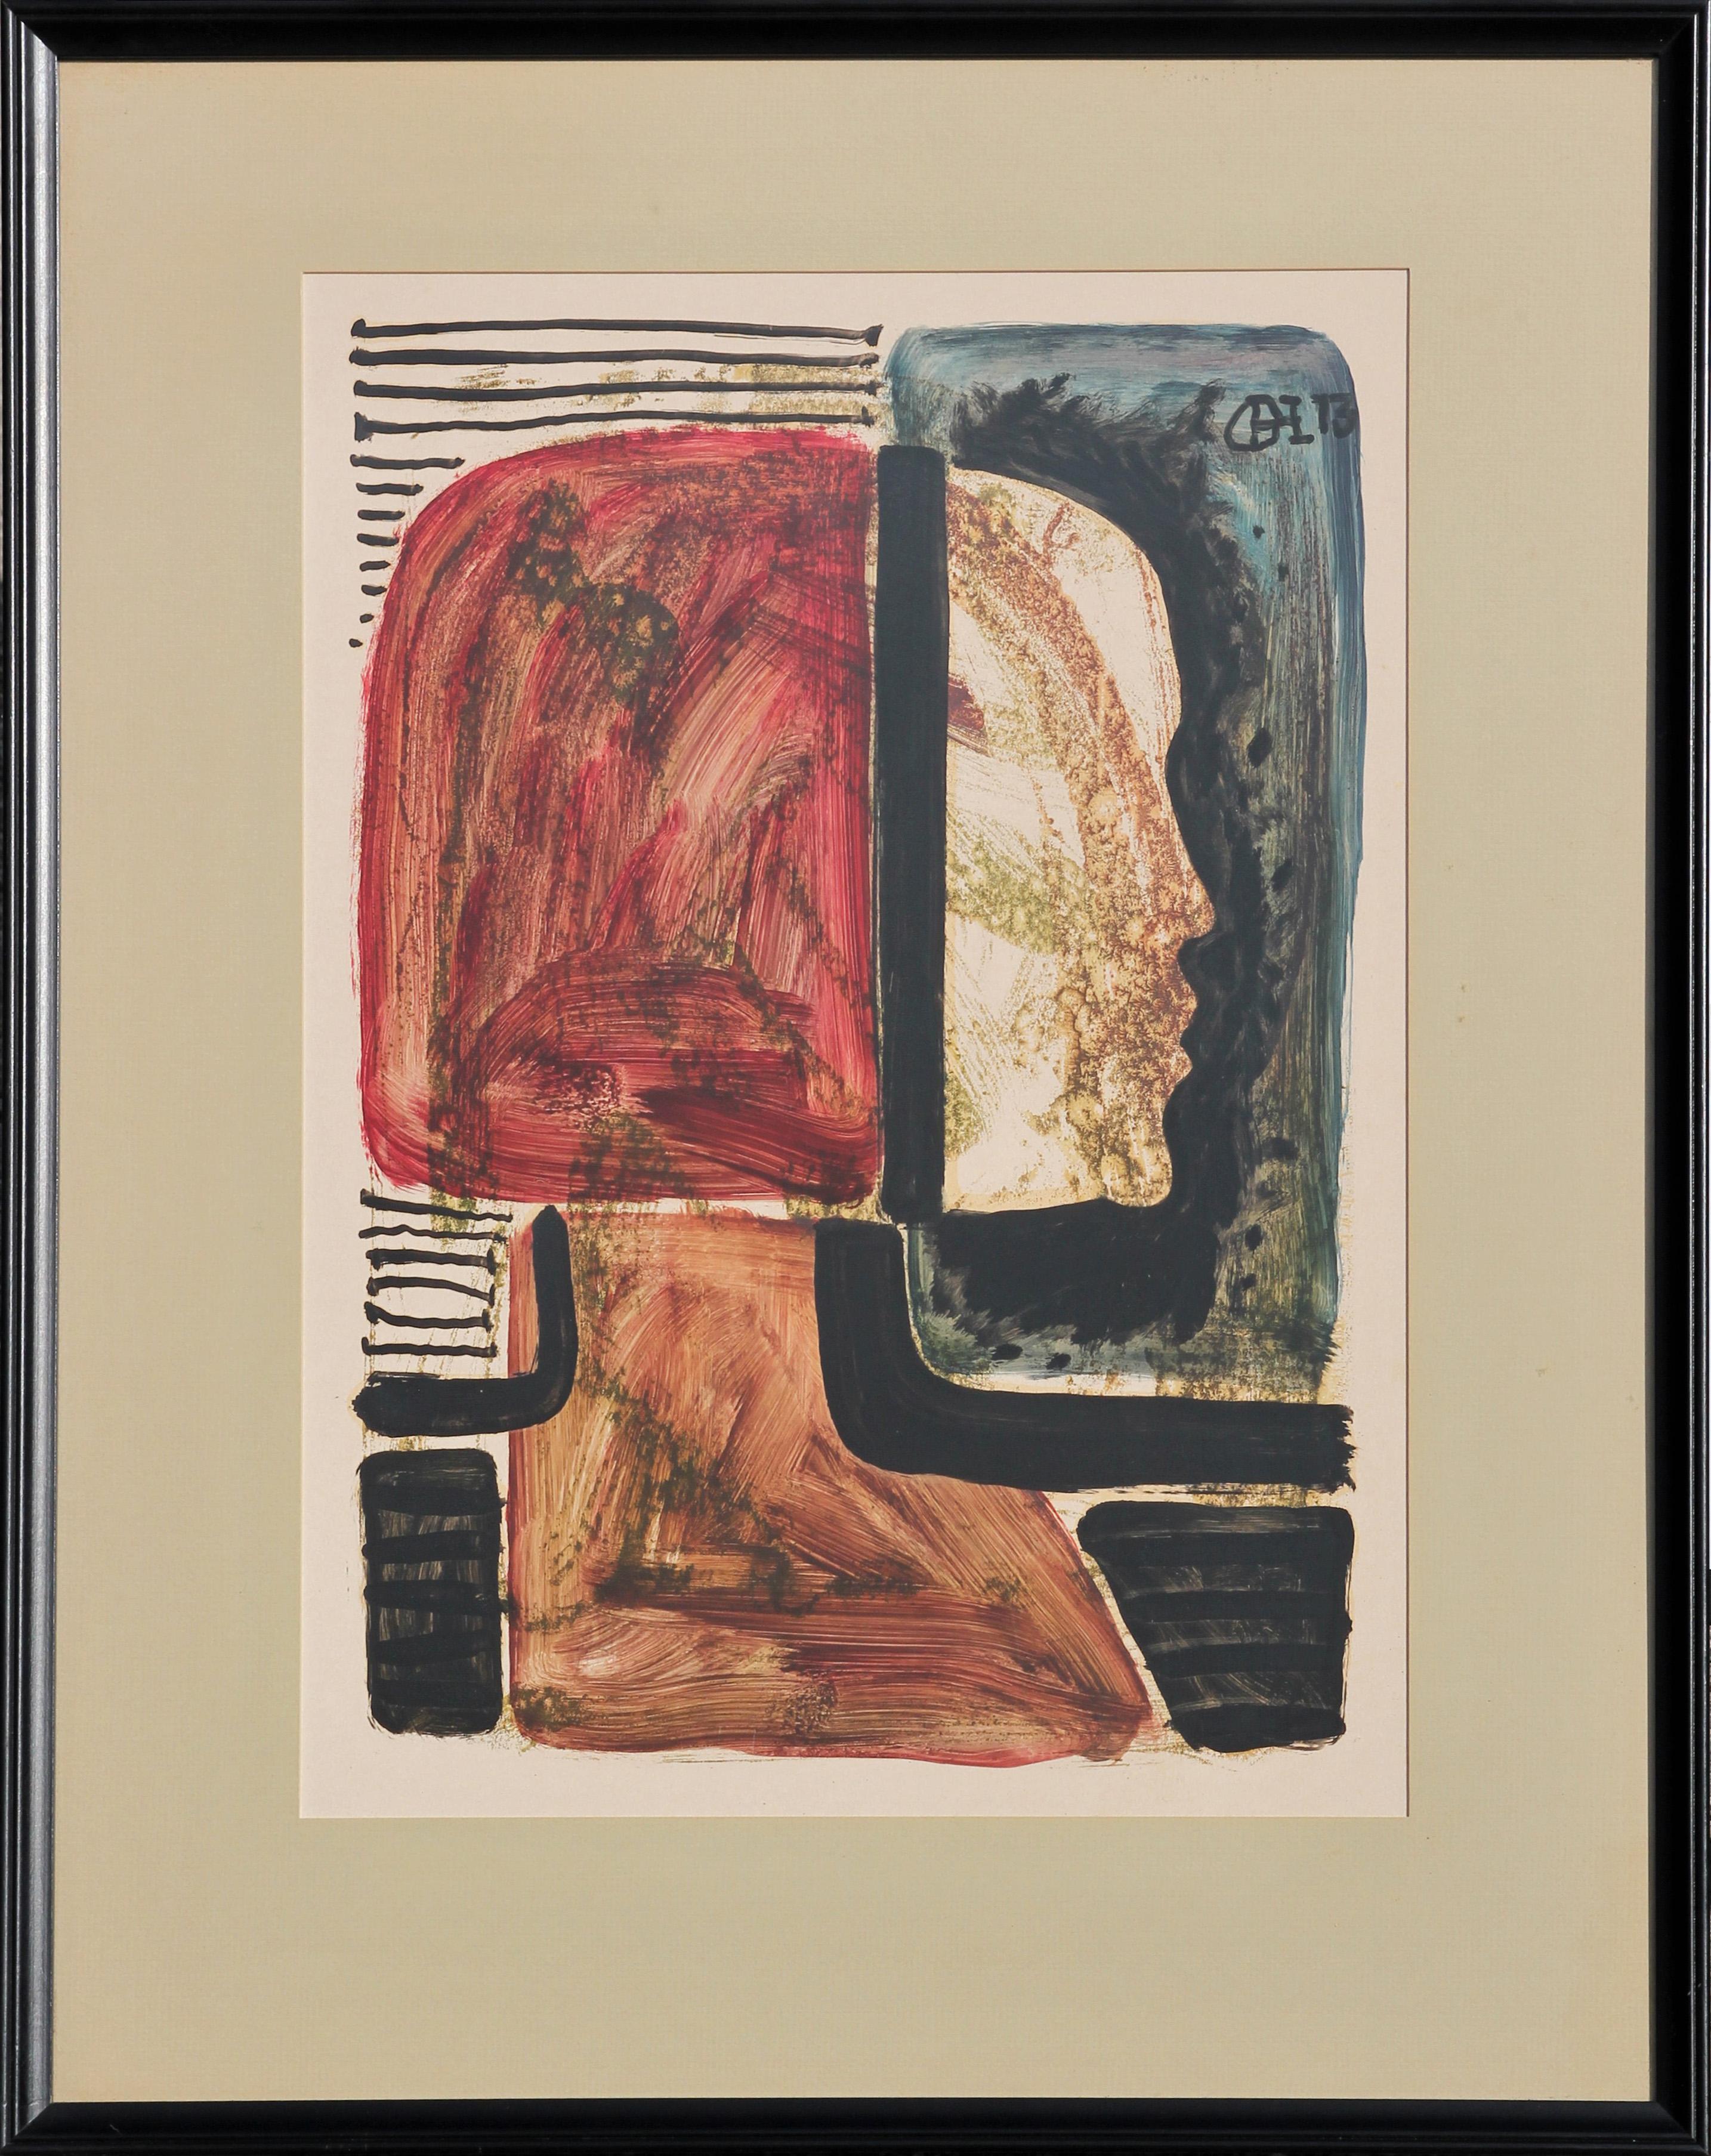 Otis Huband Abstract Drawing - "Face at the Window" Red, Blue, and Black Abstract Figurative Portrait 